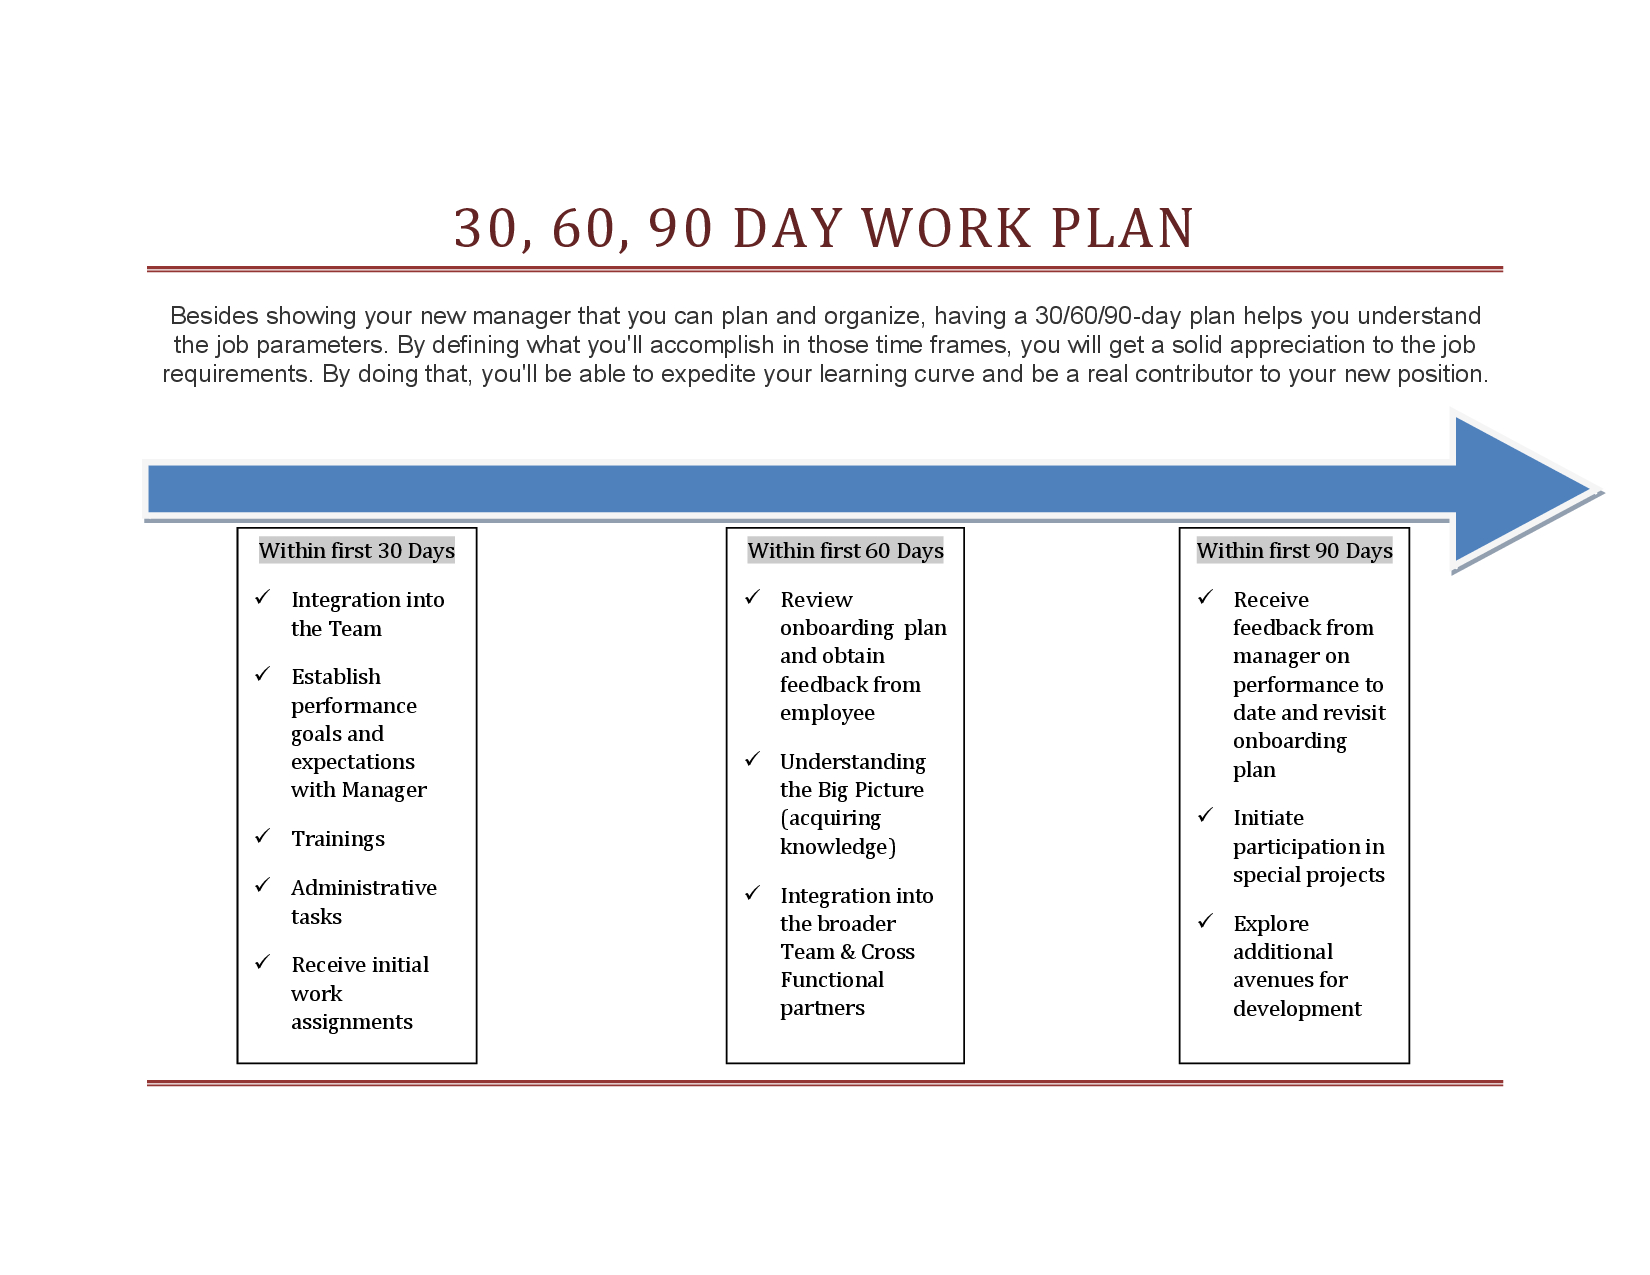 011 Day Template Ideas Stirring 30 60 90 Plan Powerpoint Pertaining To 30 60 90 Day Plan Template Word